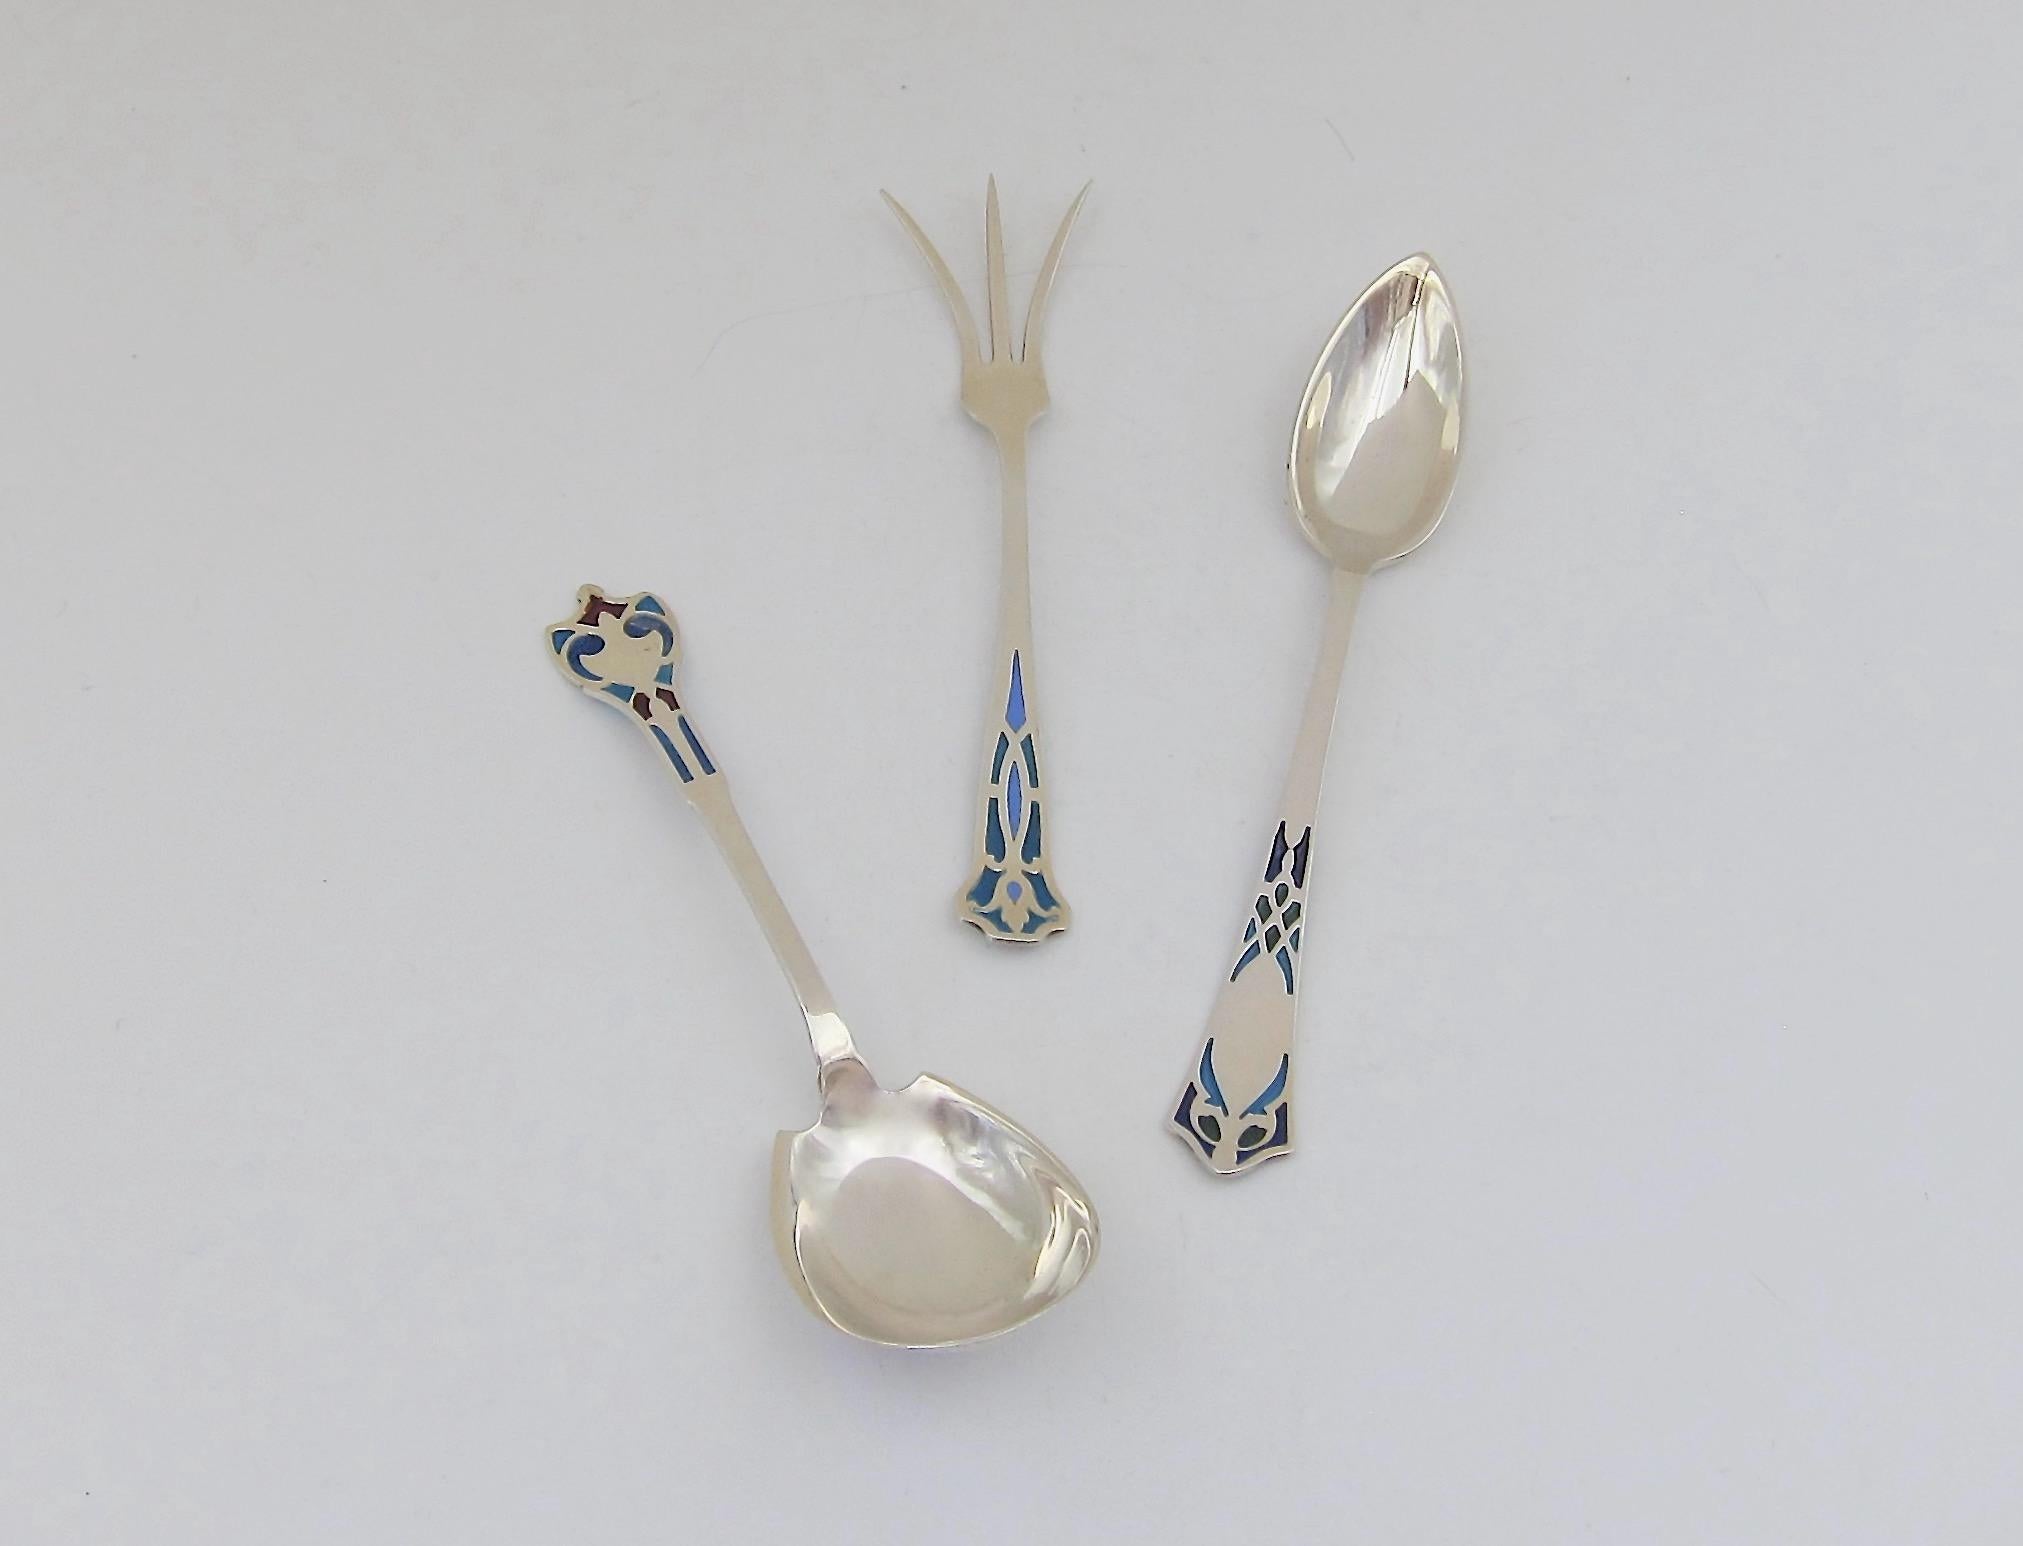 Three early 20th century American sterling silver utensils with vivid plique-à-jour enamel finials. All three specialty pieces of silver flatware are marked STERLING with New England maker's marks. The grapefruit spoon (with pointed bowl) bears the